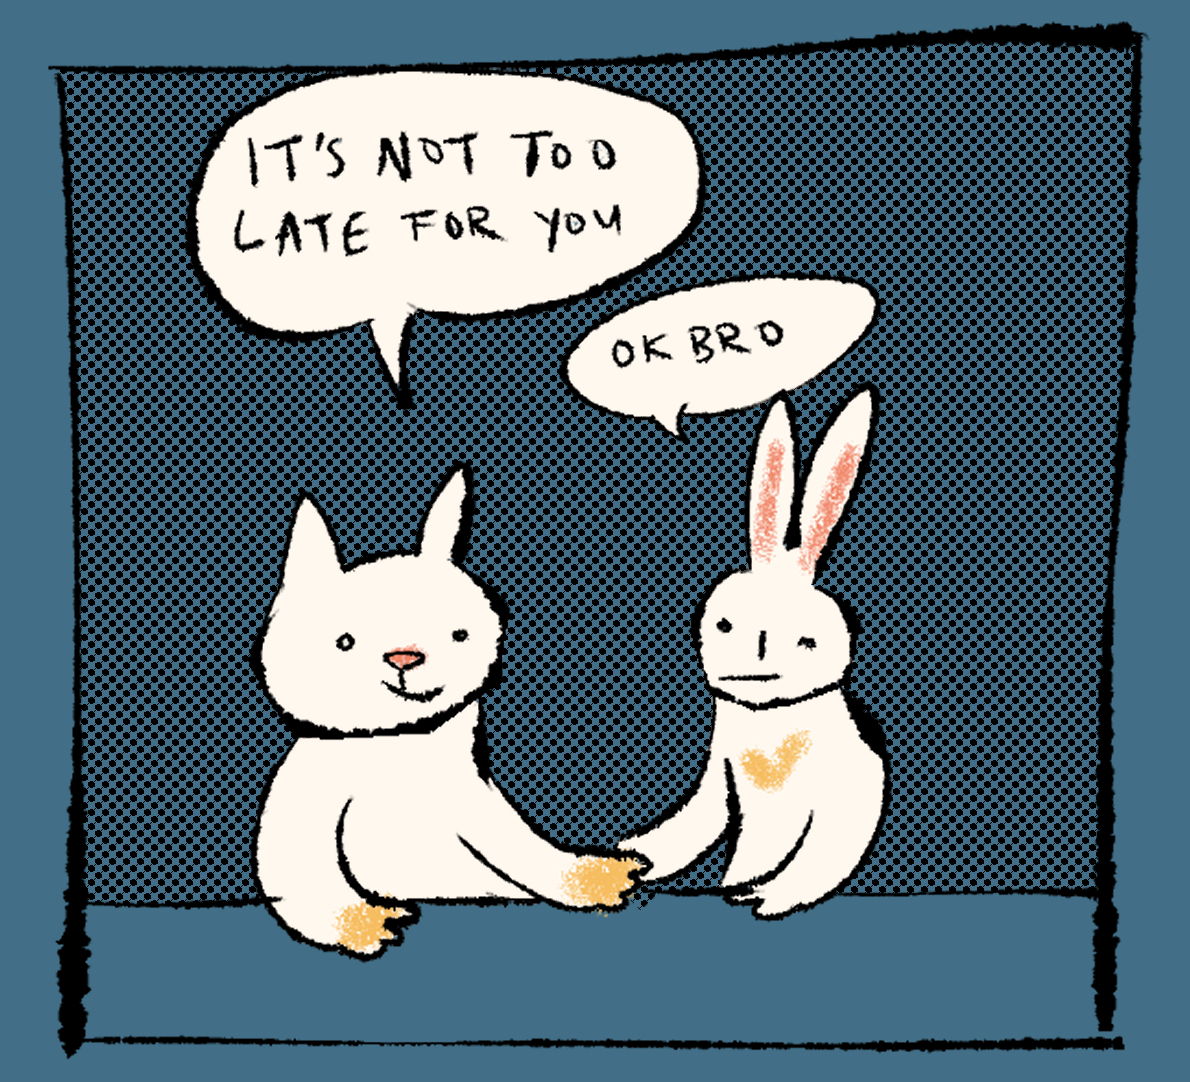 cat says its not too late for you and bunny responds ok bro in a comic panel